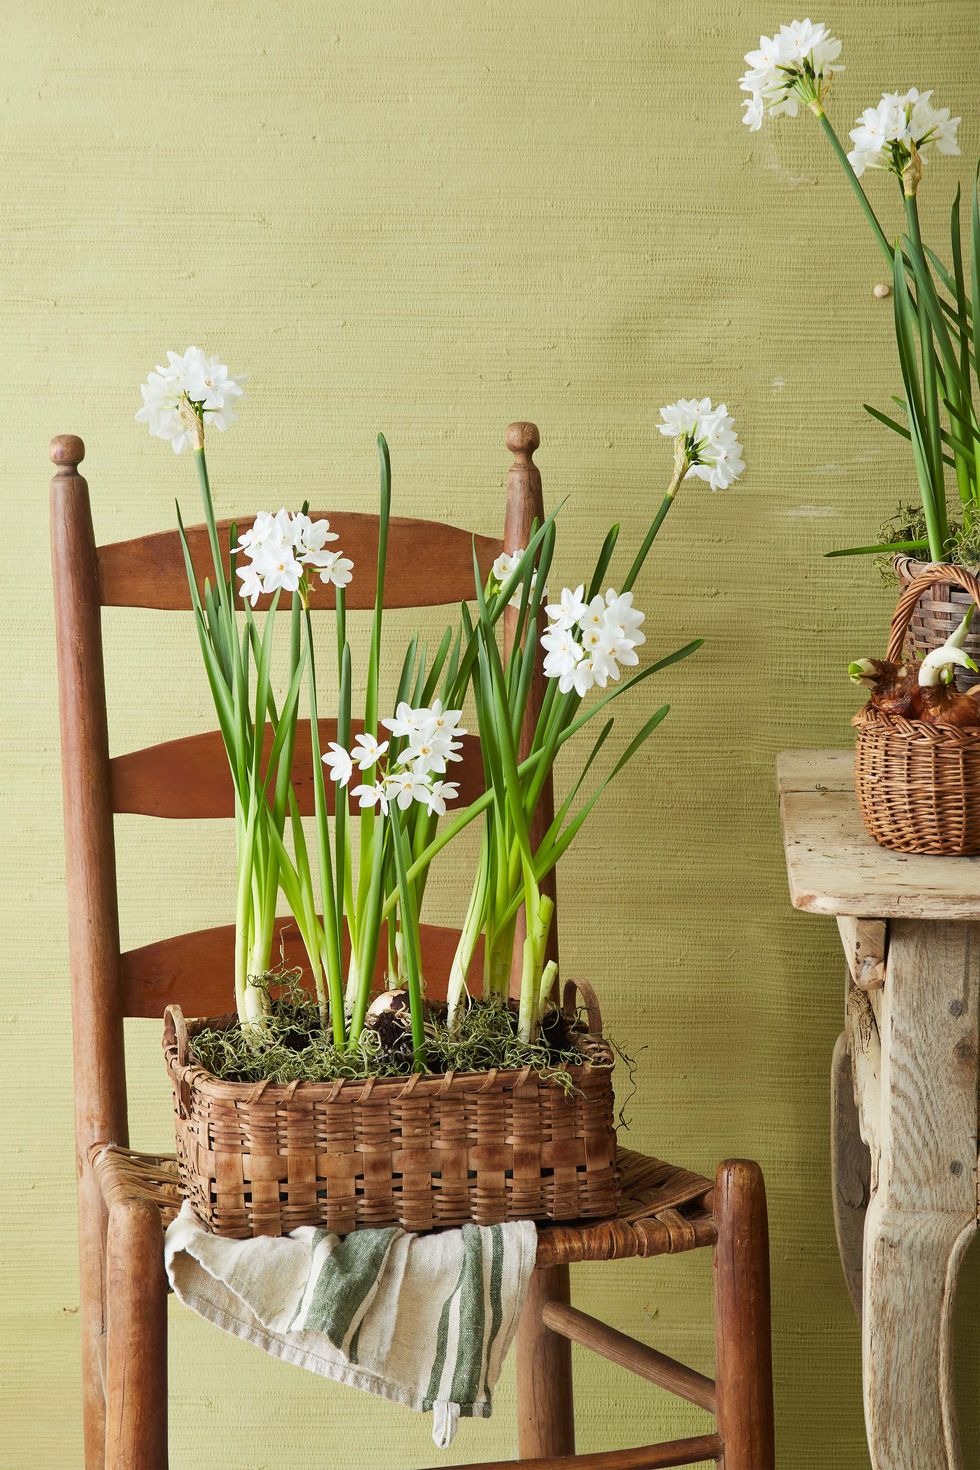 5 Easter Decor Ideas to Light Up Your Home